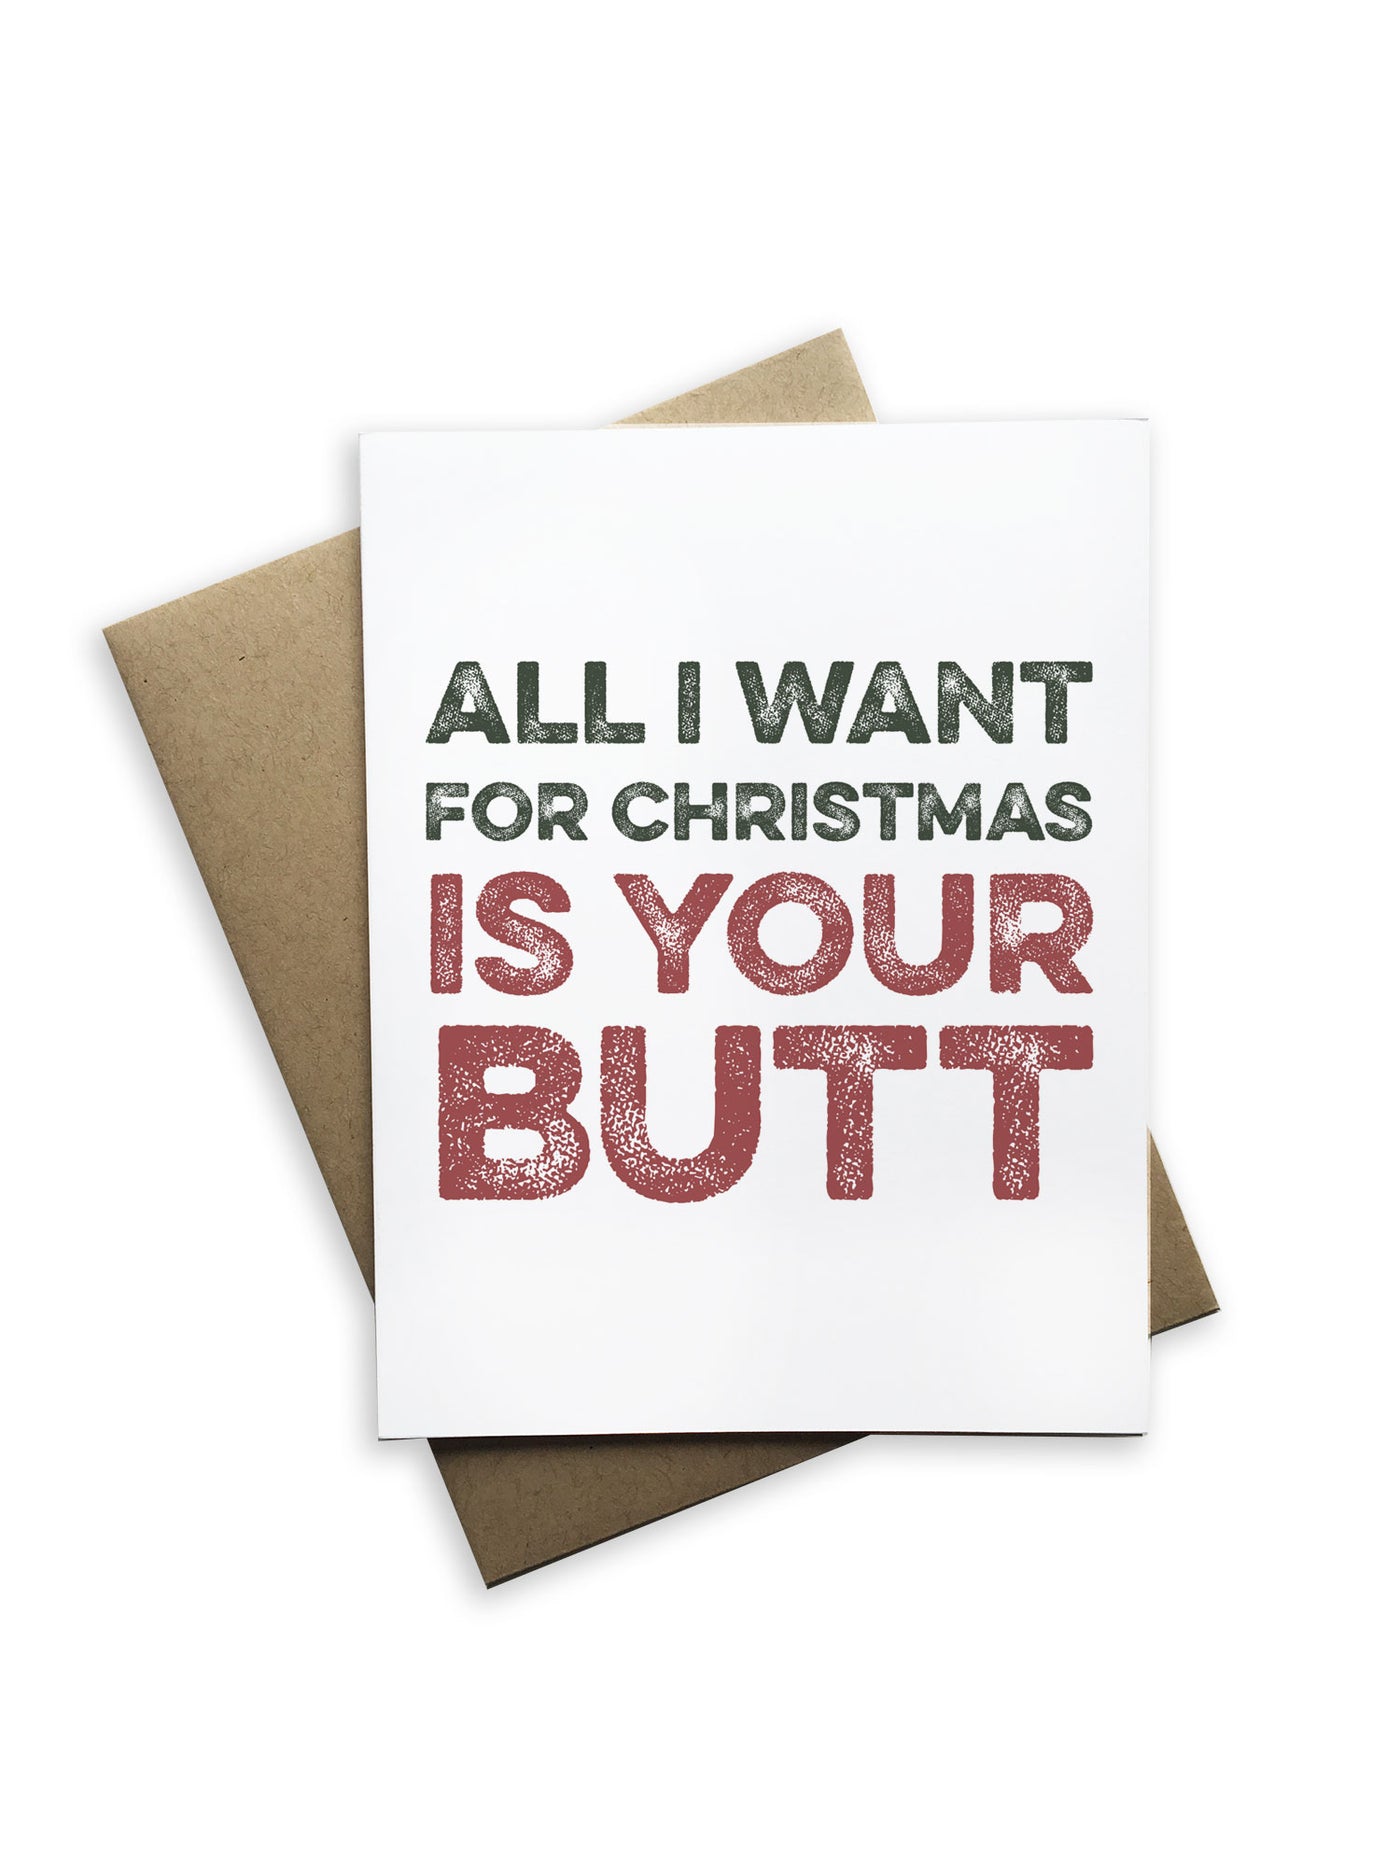 All I want for Christmas... Notecard